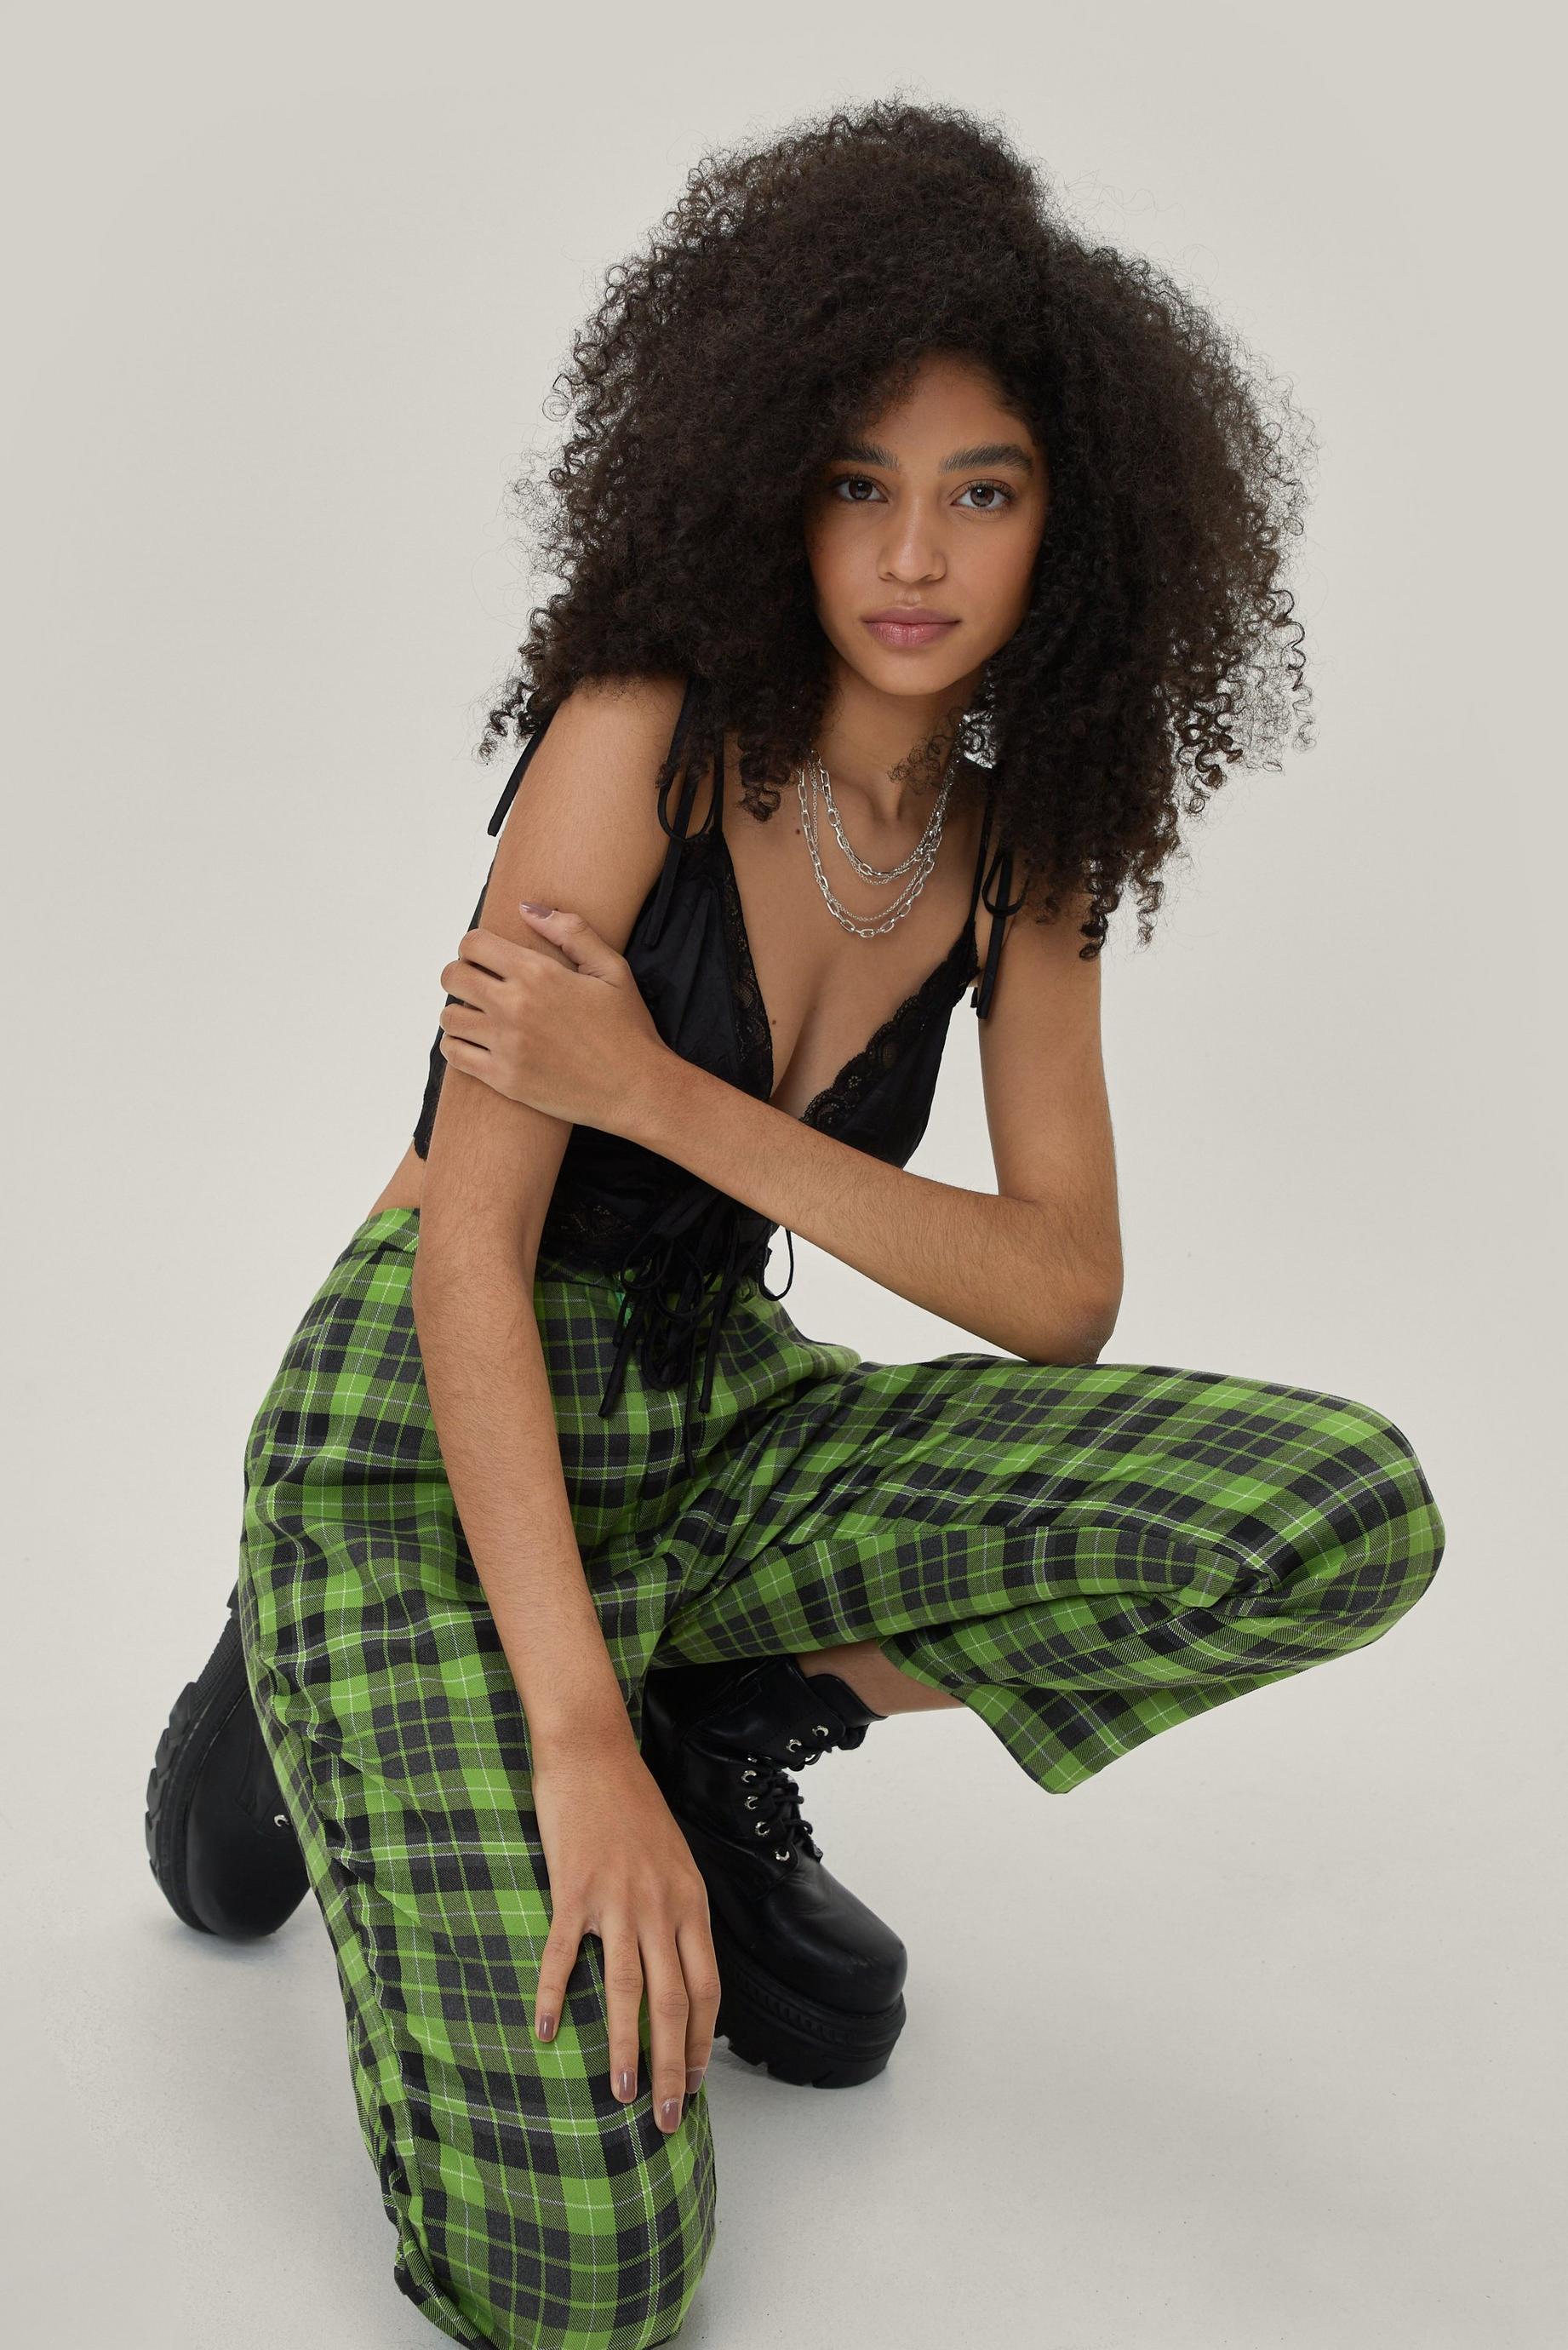 Green Check Pleated Tapered Pants